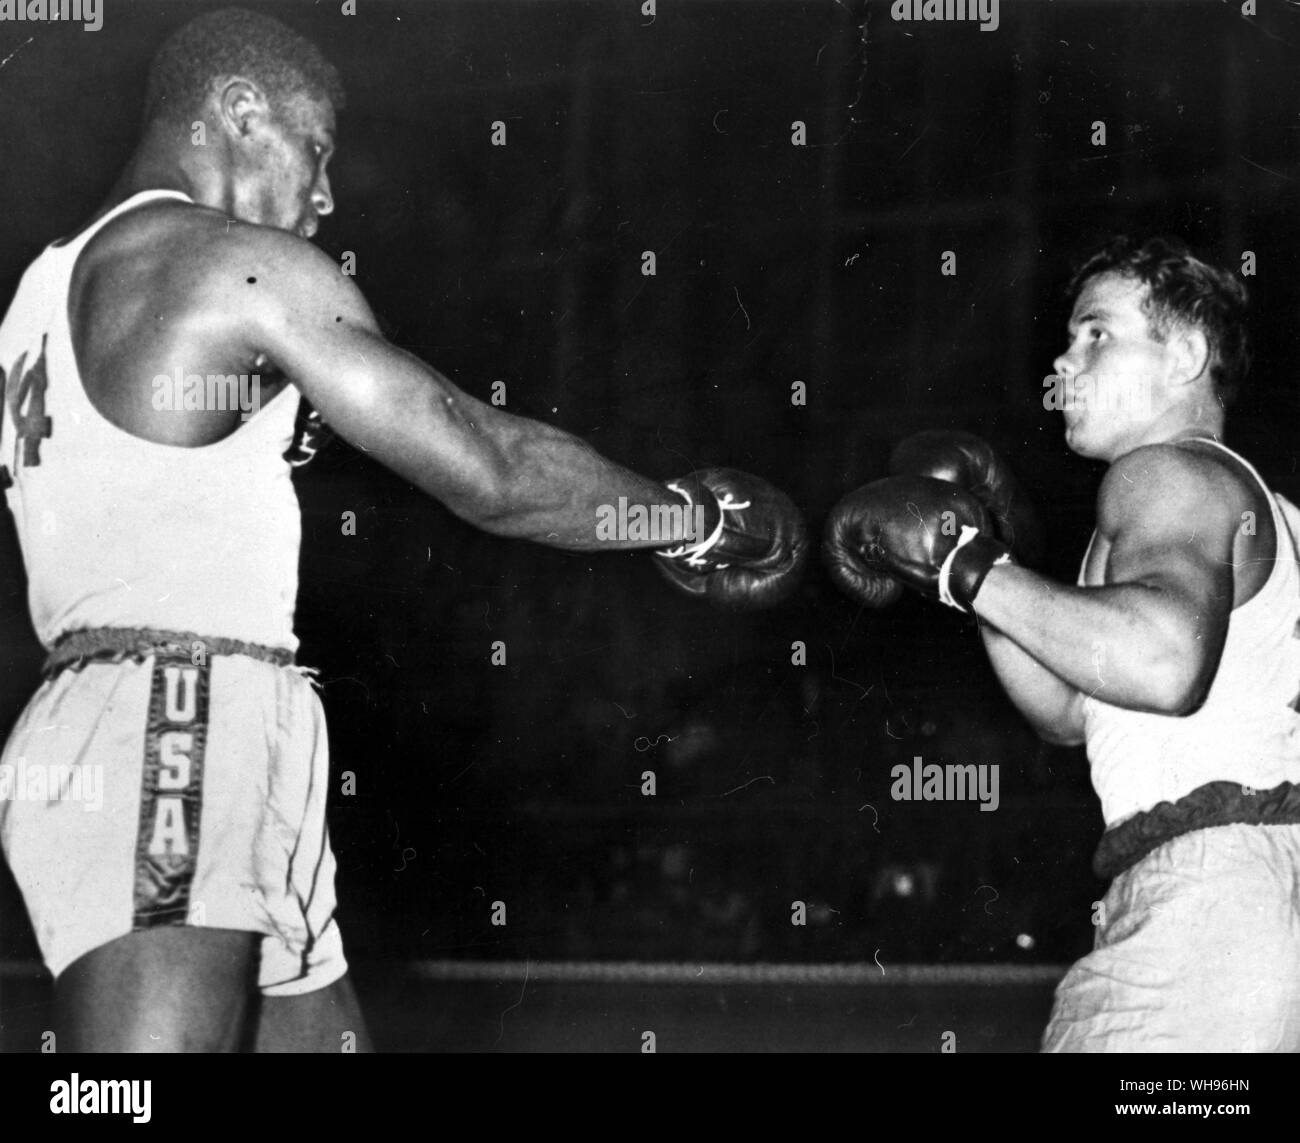 Finland,Helsinki/ Olympics,1952: The final match of the heavy-weight division. Sanders (USA) versus Johnsson (Sweden), who was disqualified and lost his silver medal.. Stock Photo